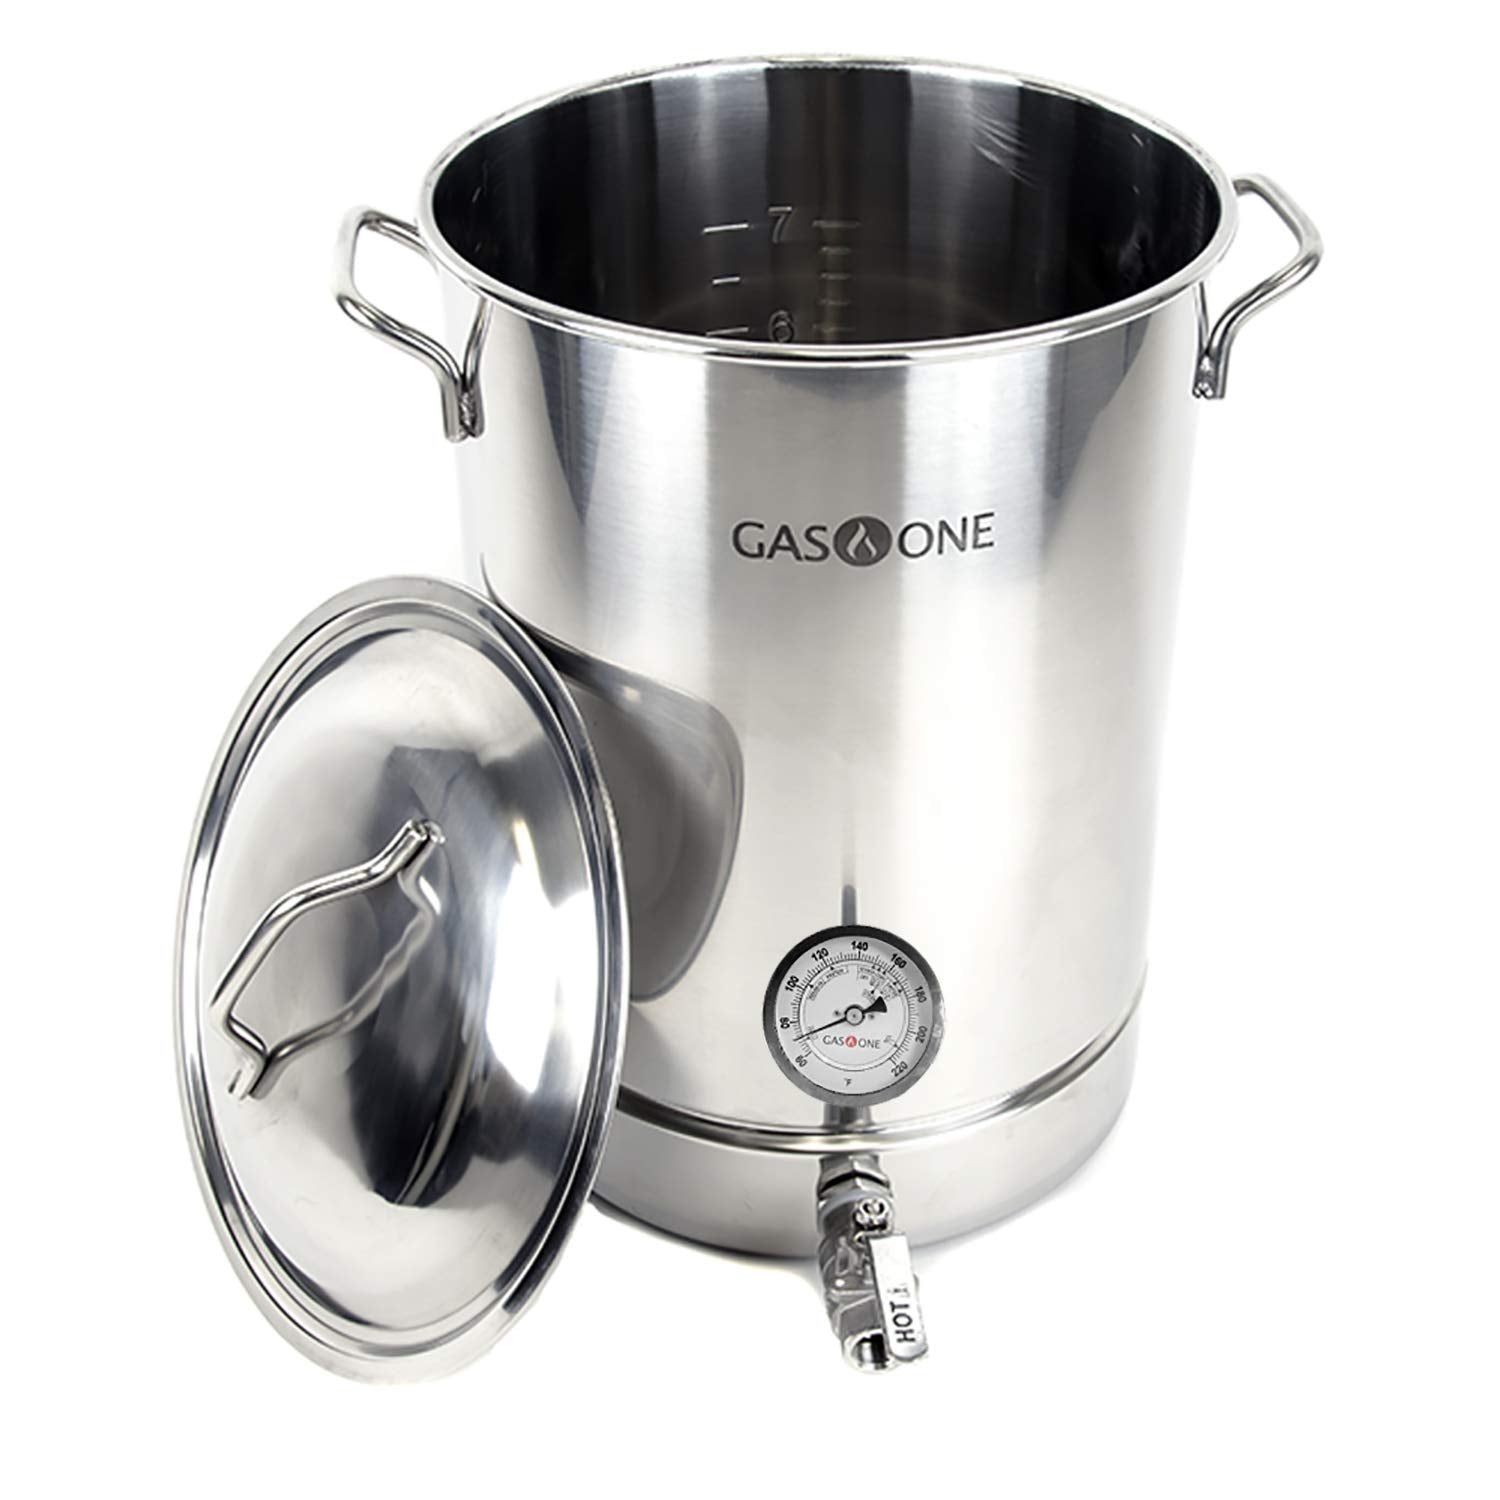 GasOne 8 Gallon Stainless Steel Home Brew Kettle Pot Pre Drilled 4 PC Set 32 Quart Tri Ply Bottom for Beer Brewing Includes Stainless Lid Ball Valve Spigot and Plug - Home Brewing Supplies